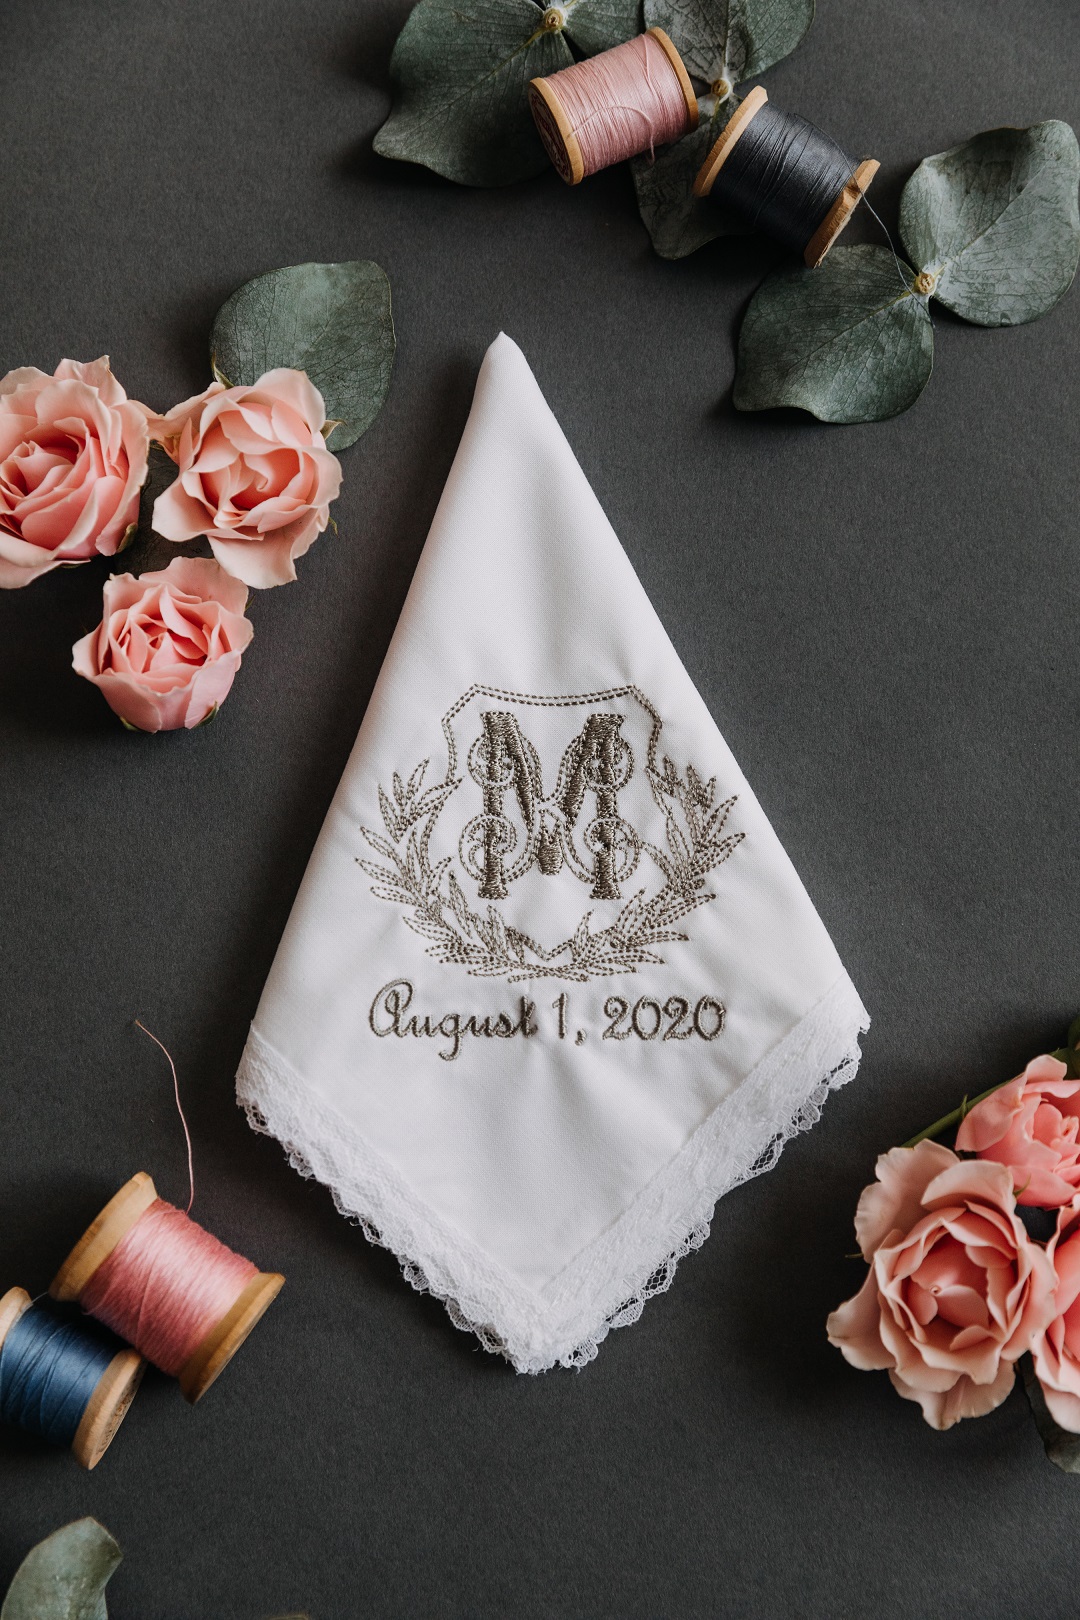 custom wedding handkerchief with monogram and date embroidered in taupe thread.